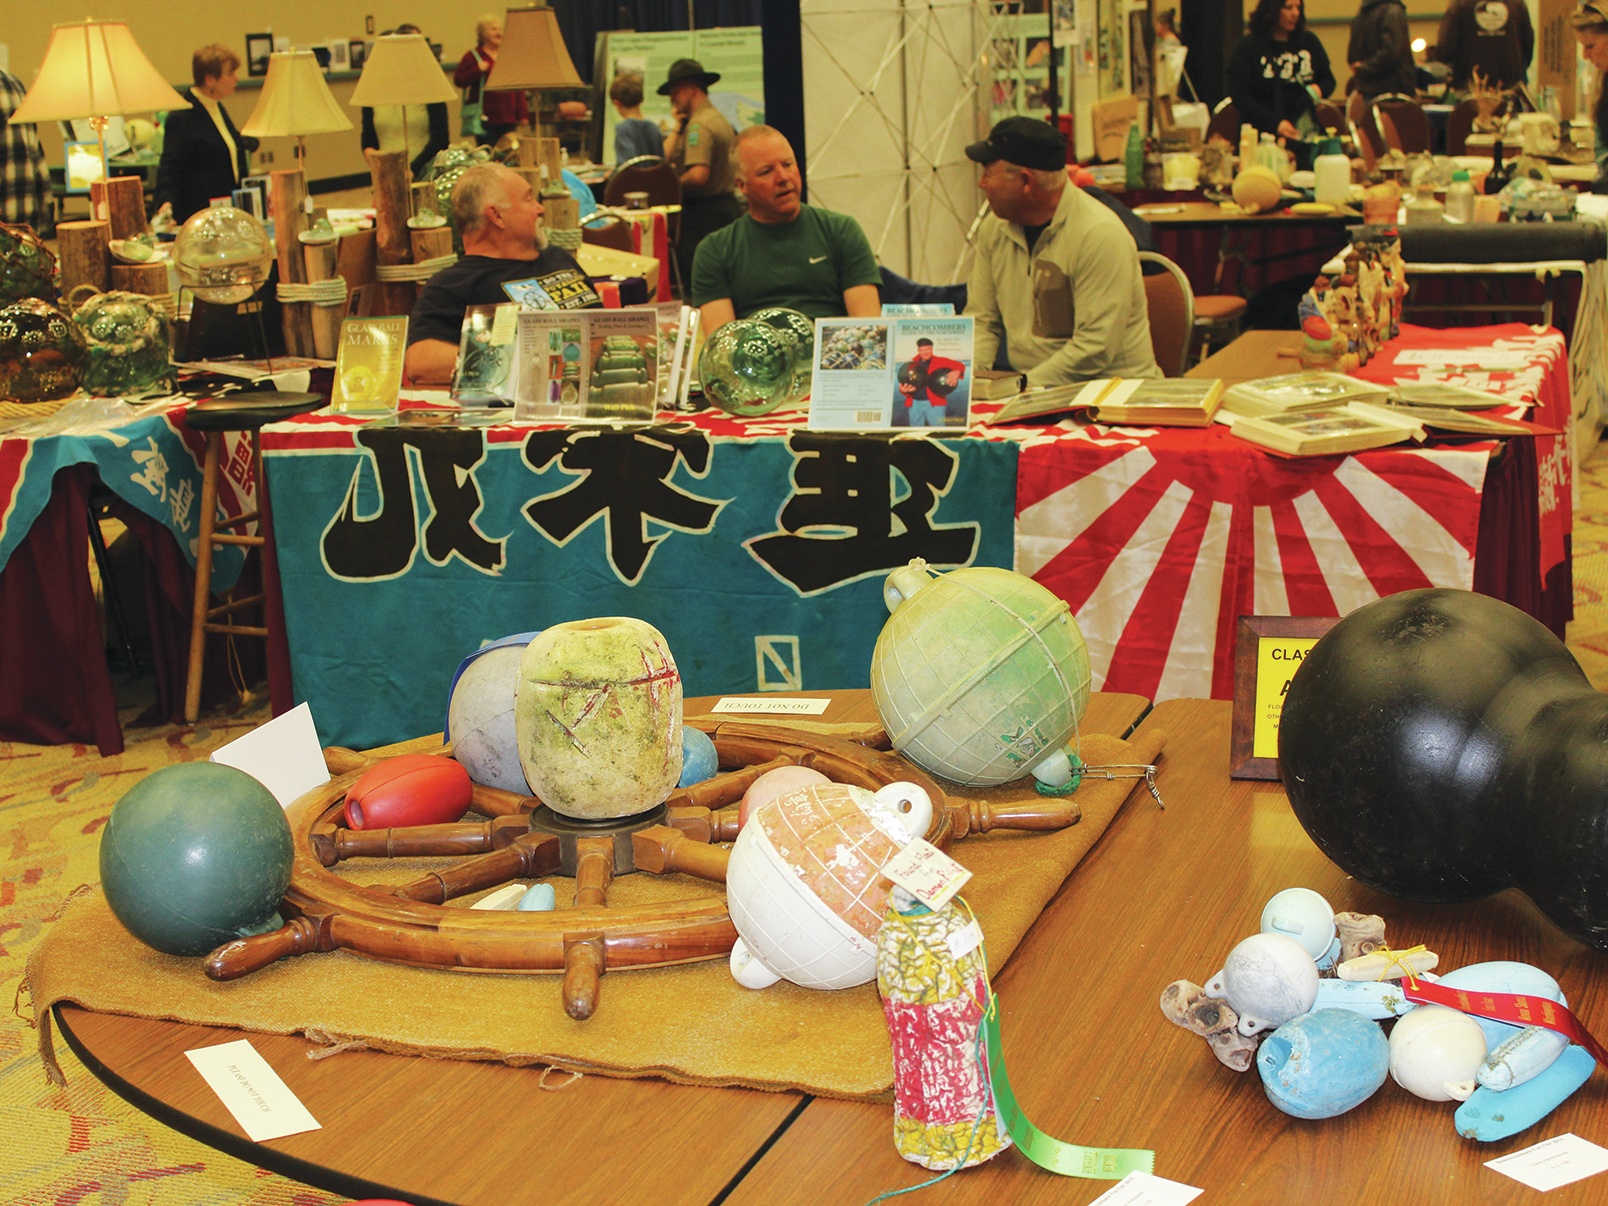 North Coast News: The Beachcombers Fun Fair features a wide array of treasures found on our local beaches, as well as many noted authors, speakers and experts.